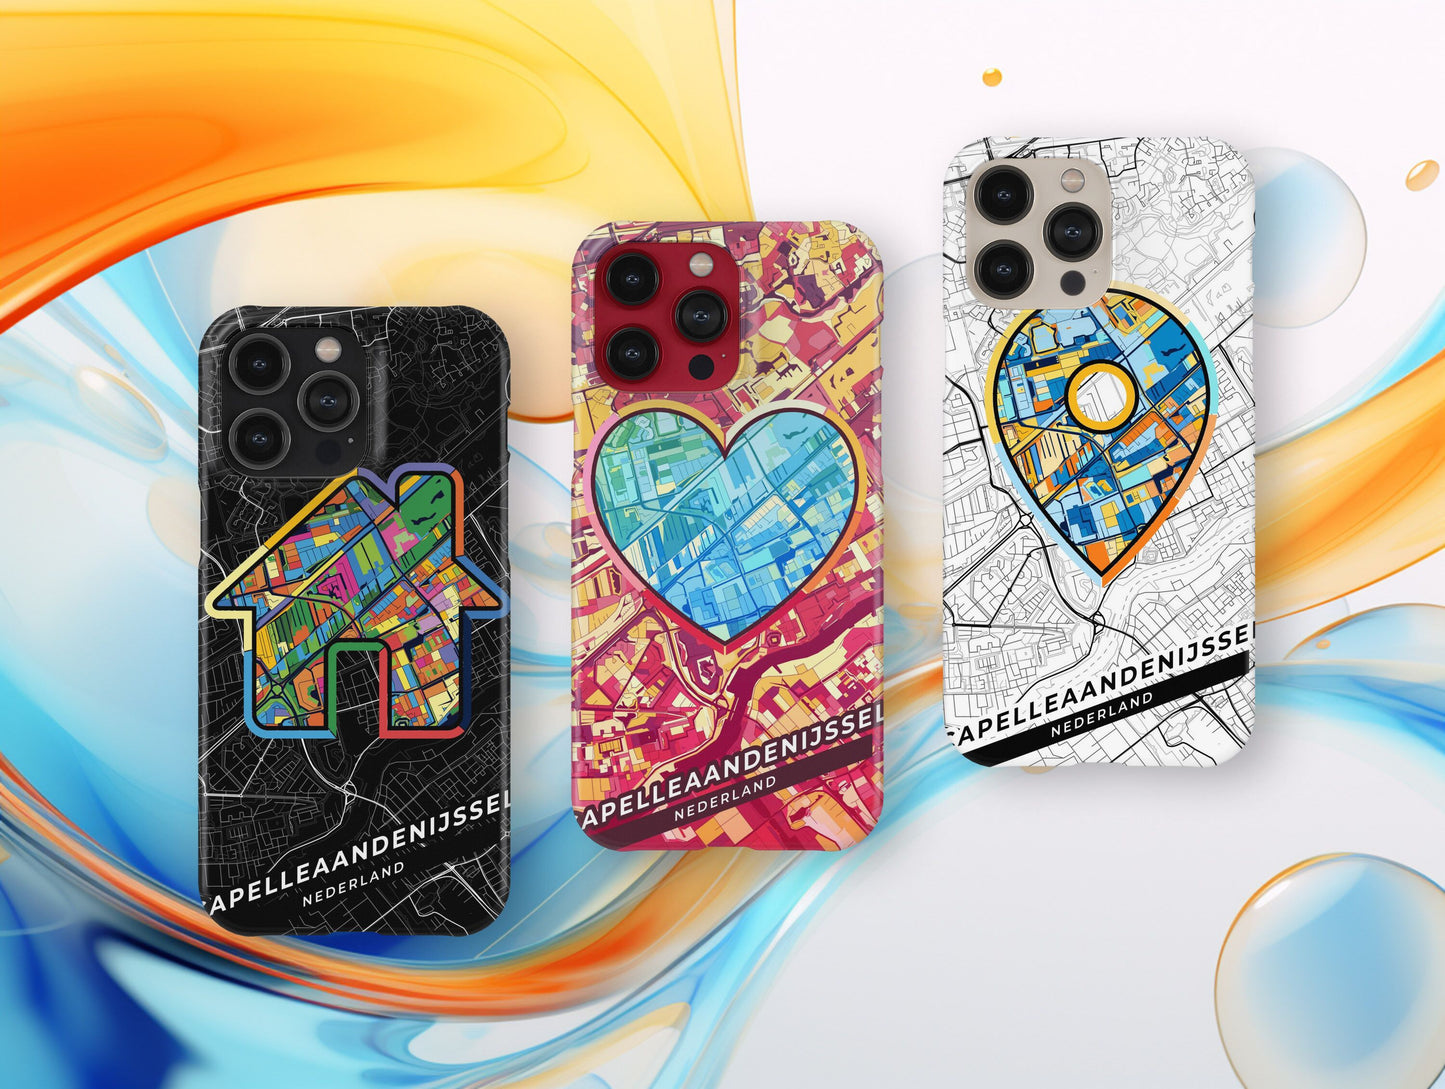 Capelle Aan Den Ijssel Netherlands slim phone case with colorful icon. Birthday, wedding or housewarming gift. Couple match cases.